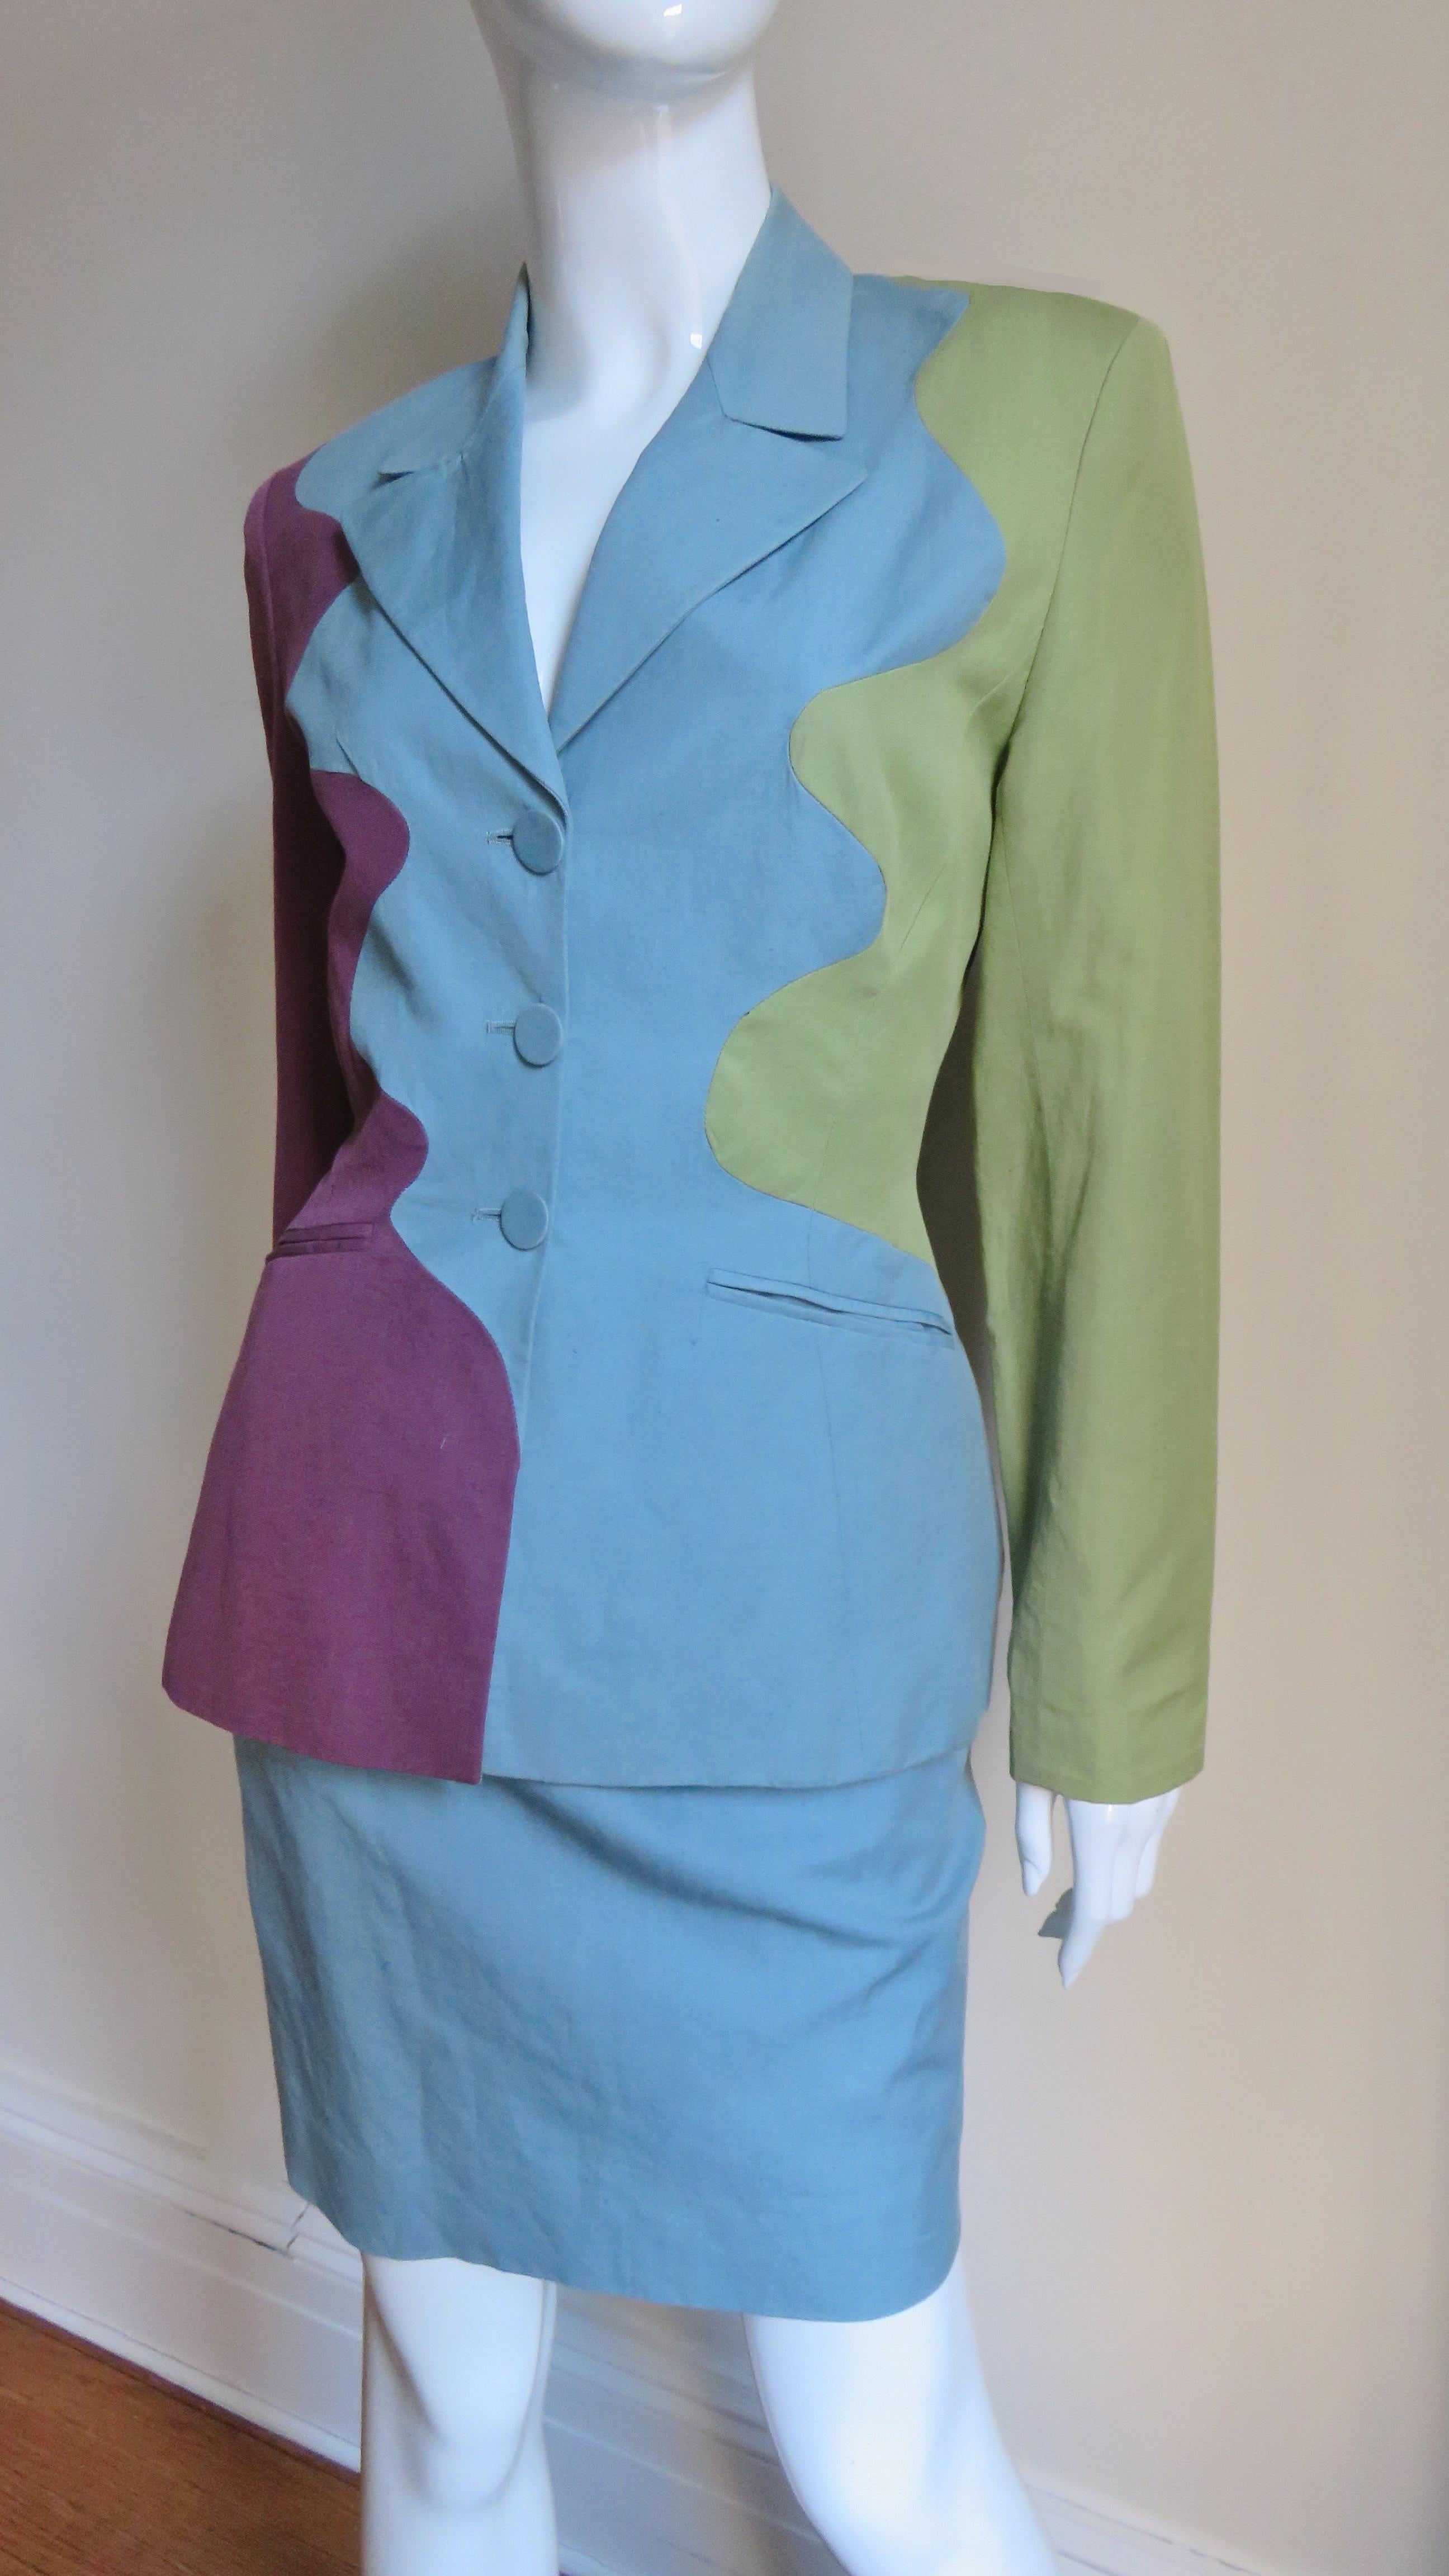 Sophie Sitbon Color Block Skirt Suit In Good Condition For Sale In Water Mill, NY